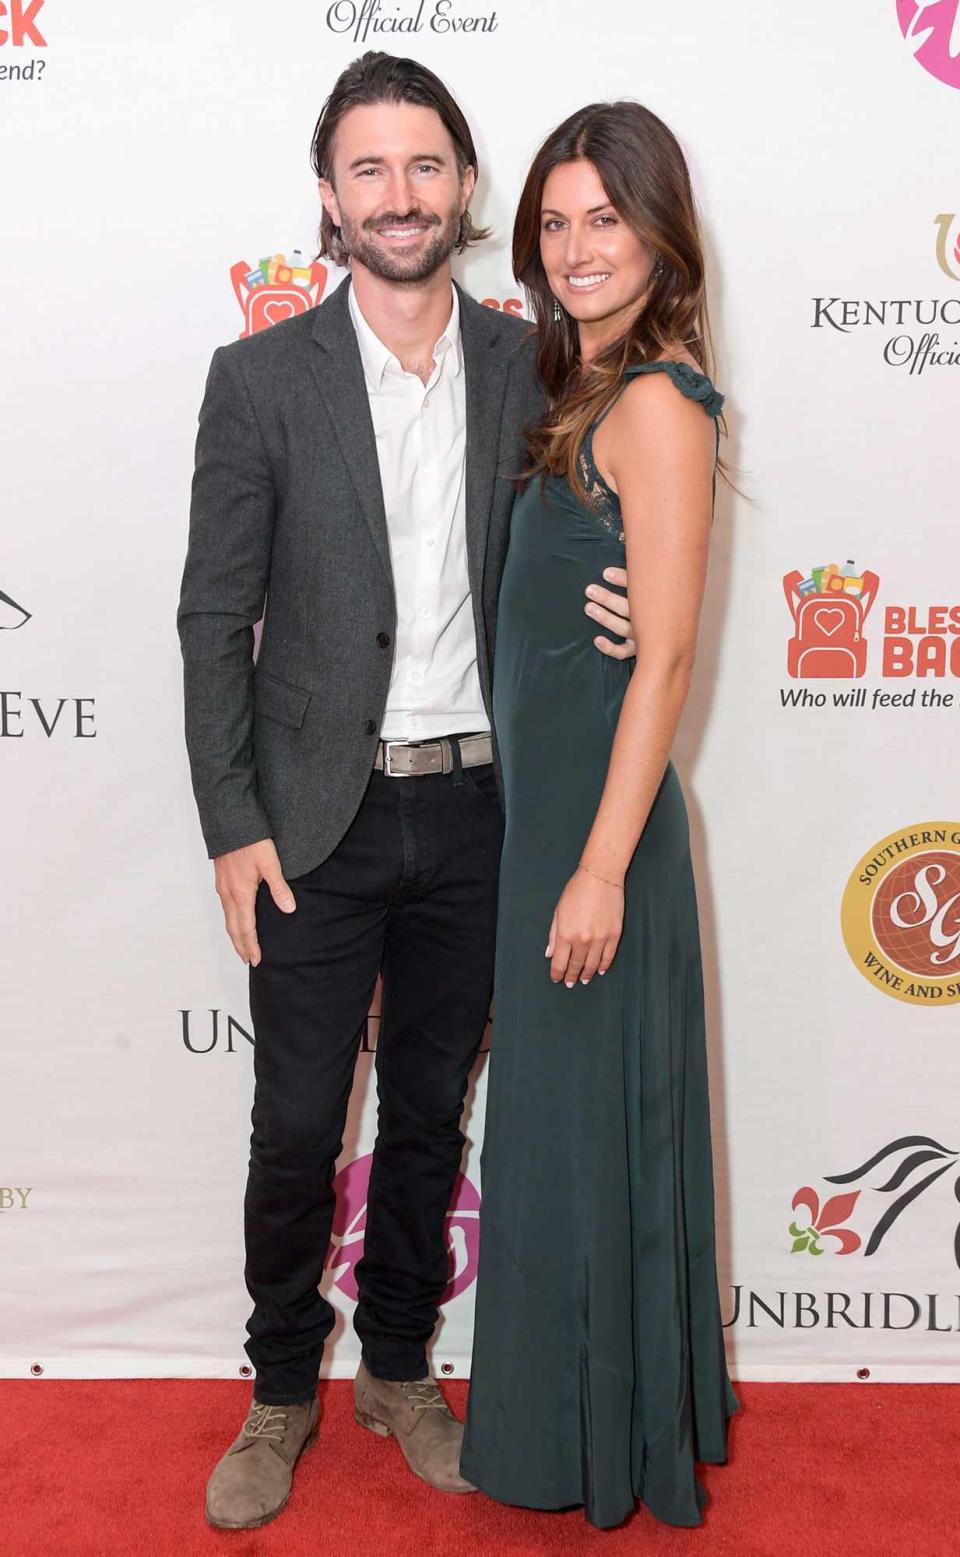 Brandon Jenner (L) attends the 145th Kentucky Derby Unbridled Eve Gala at The Galt House Hotel & Suites Grand Ballroom on May 03, 2019 in Louisville, Kentucky